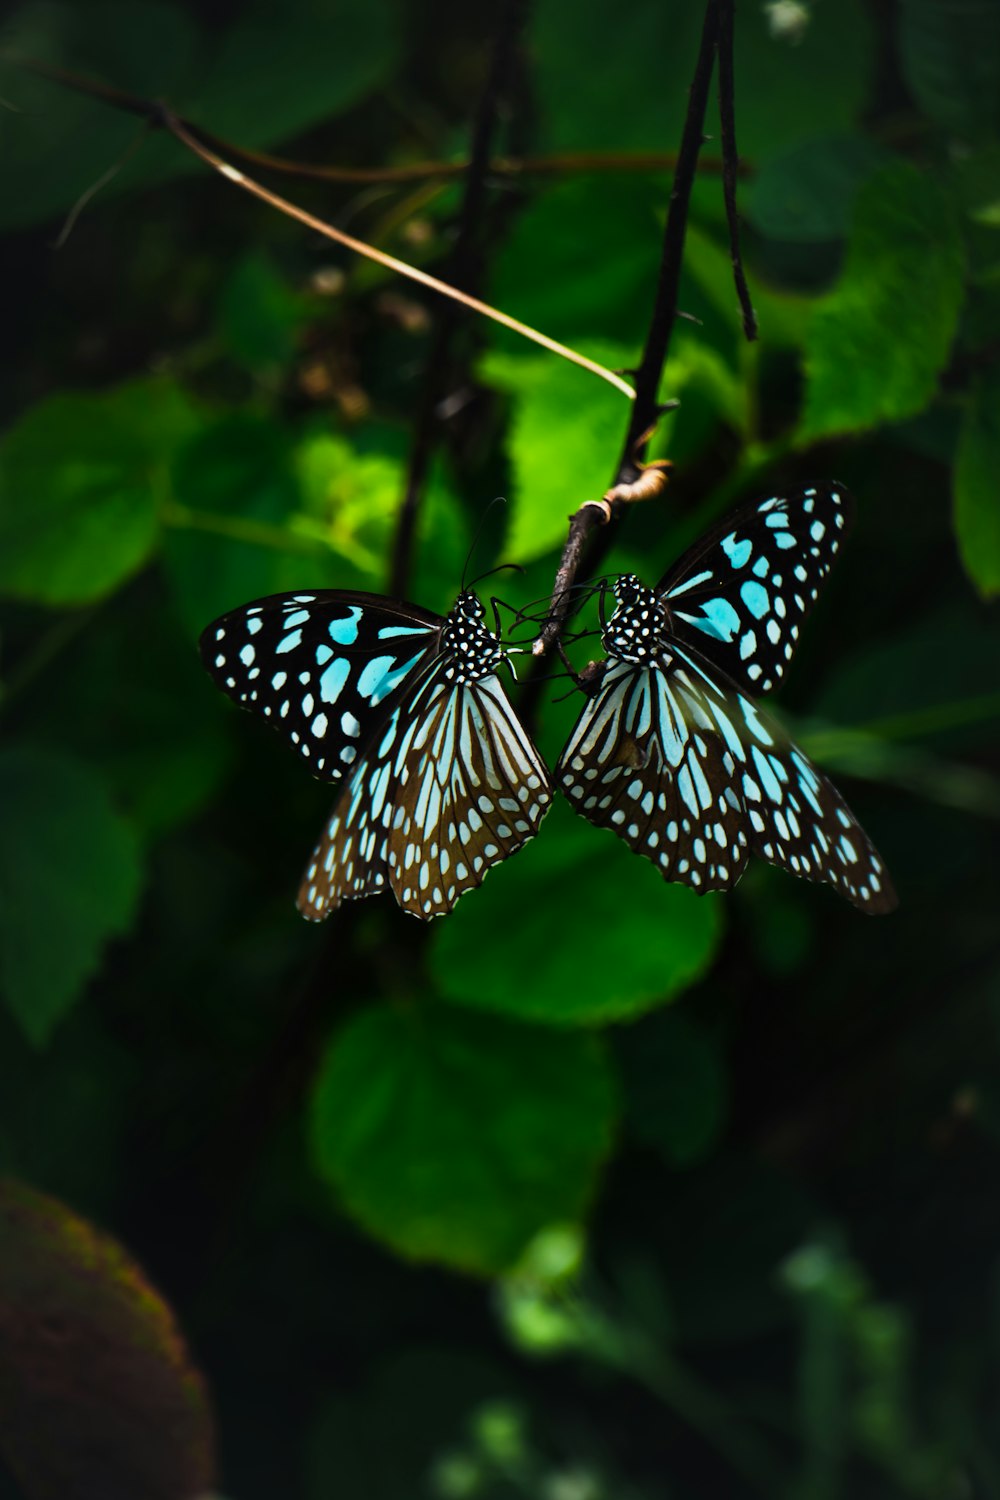 Black and white butterfly perched on green leaf photo – Free ...